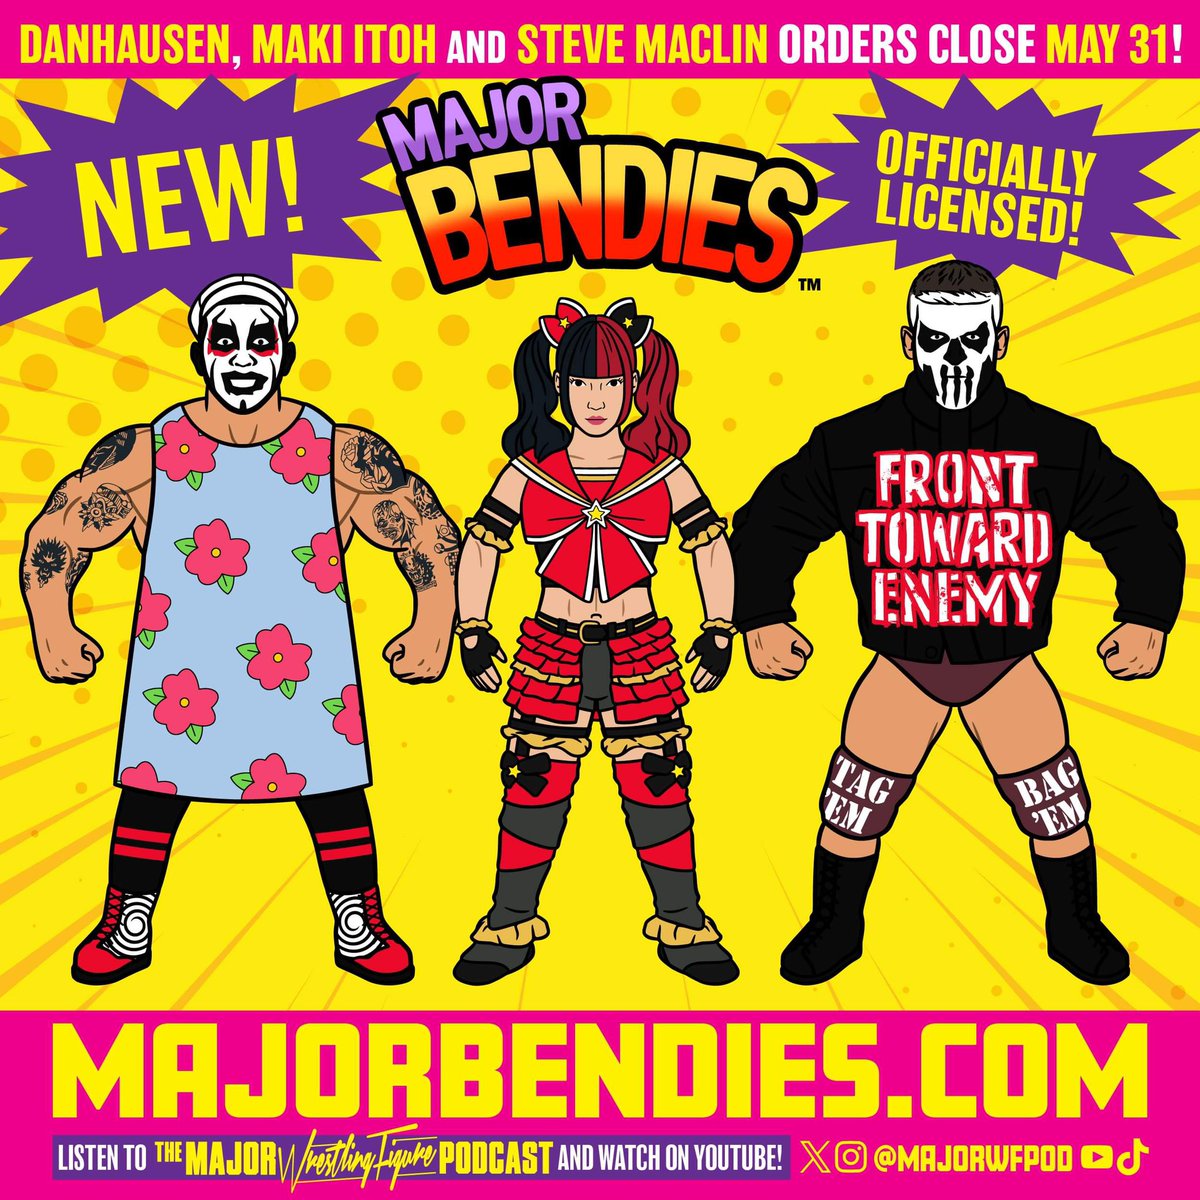 New #MajorBendies up for pre-order, NOW! @DanhausenAD in his Homer inspired muumuu! @maki_itoh getting what might be the cutest Major Bendie in the world! @SteveMaclin showing his war face & Front Toward Enemy jacket! This Toyetic crew can be found at MajorBendies.com!